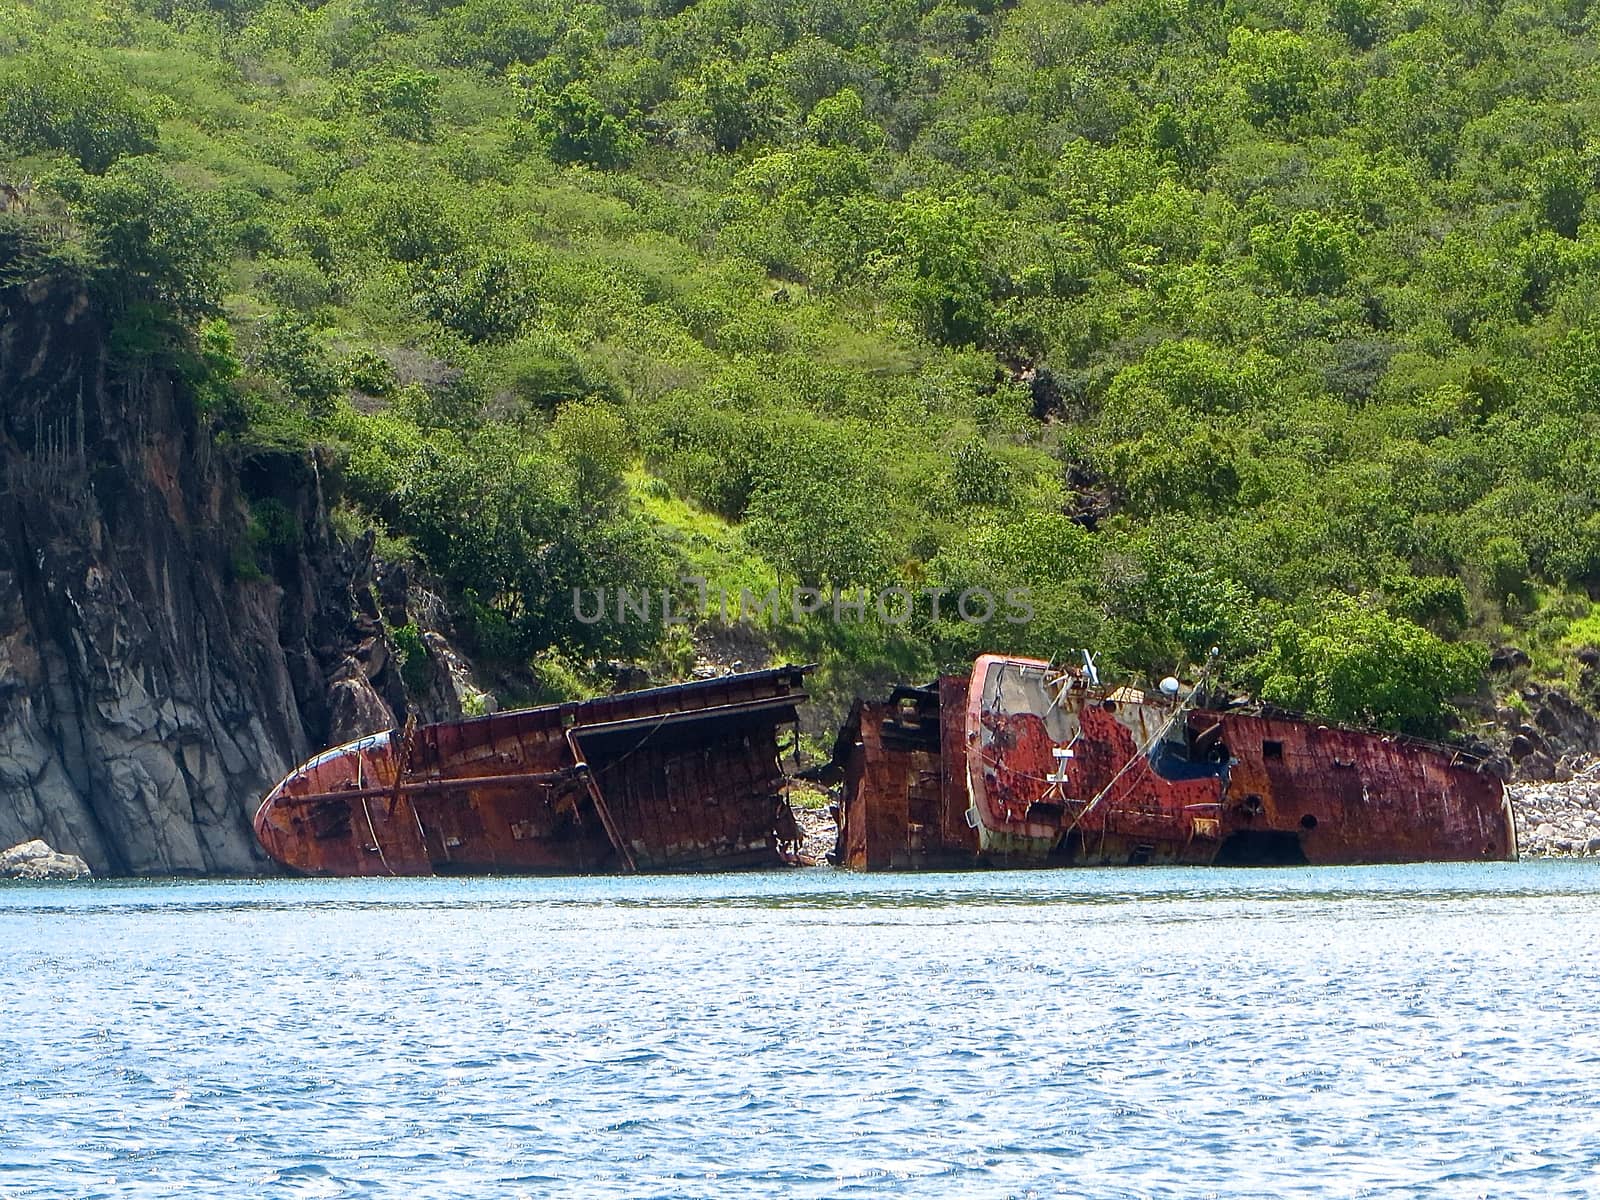 Shipwreck off St. Kitts in the Caribbean Sea.